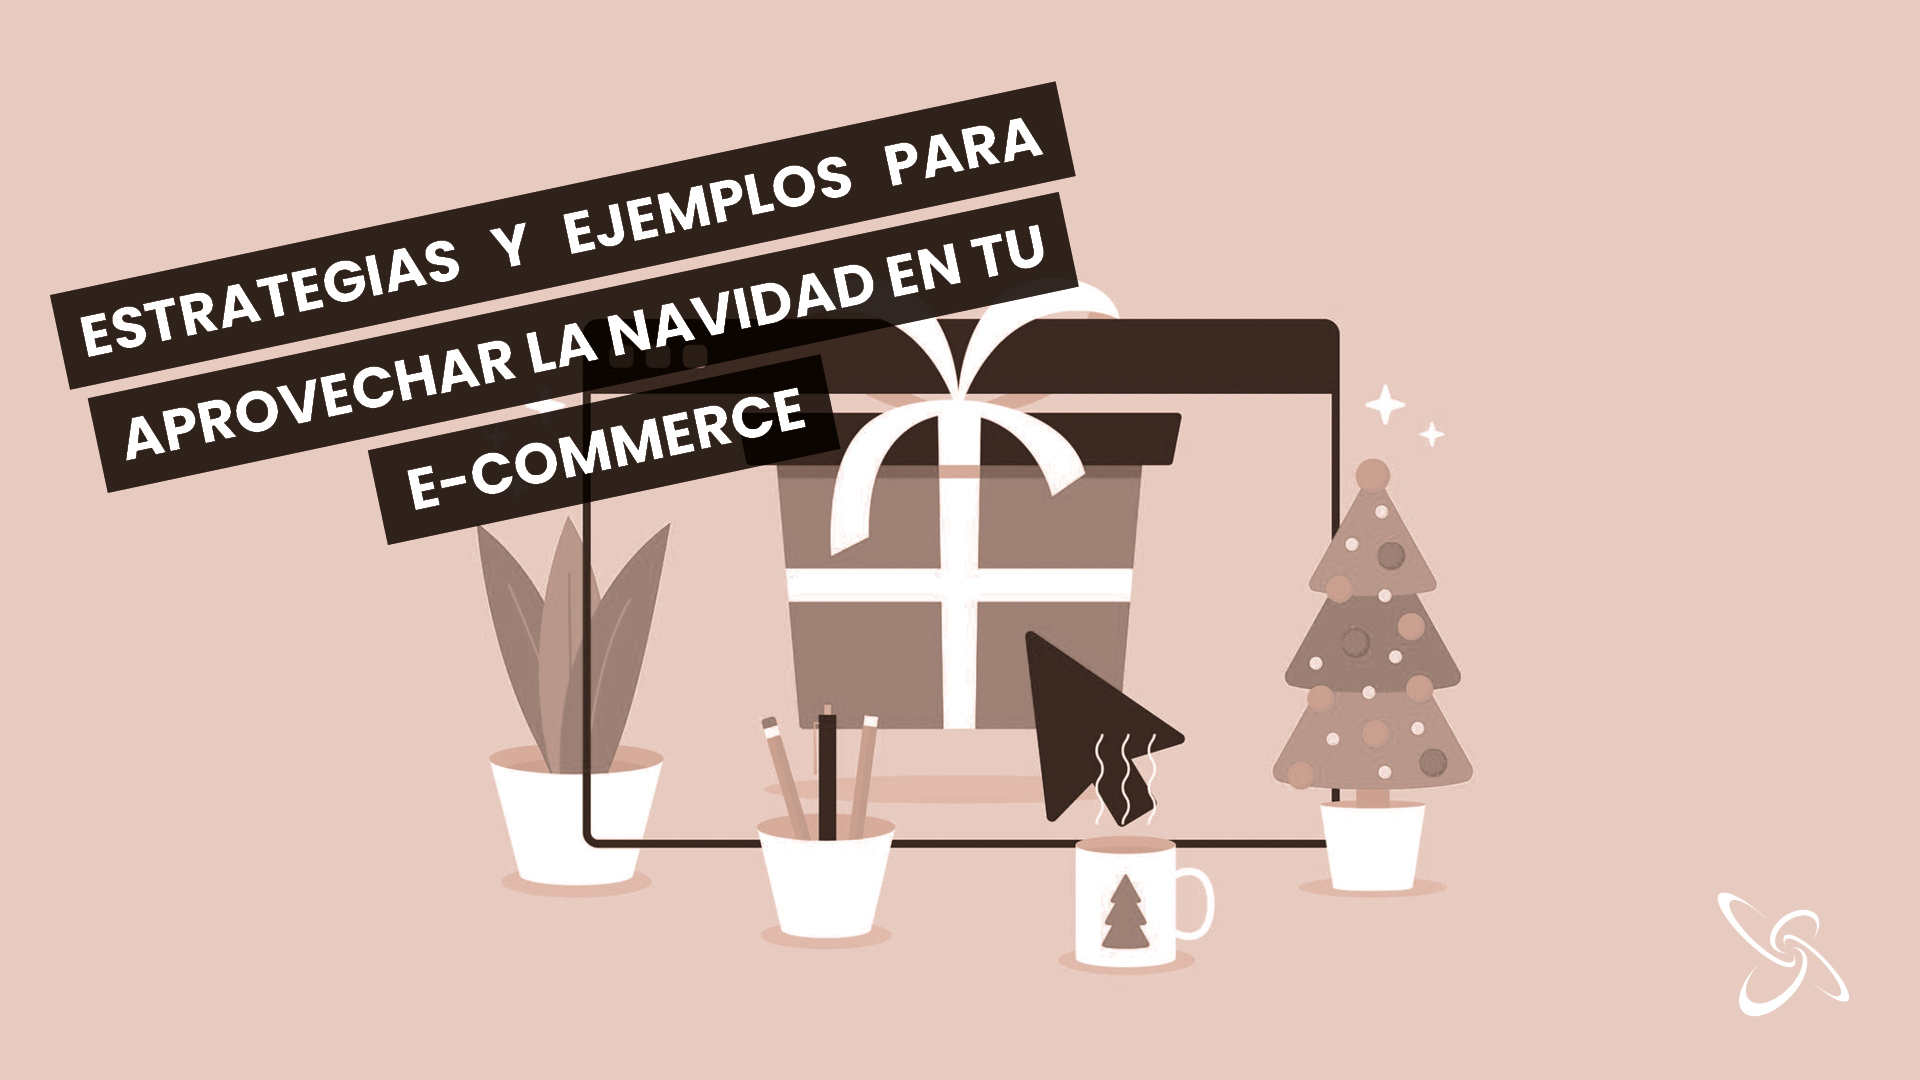 Strategies and examples to take advantage of Christmas in your e-commerce